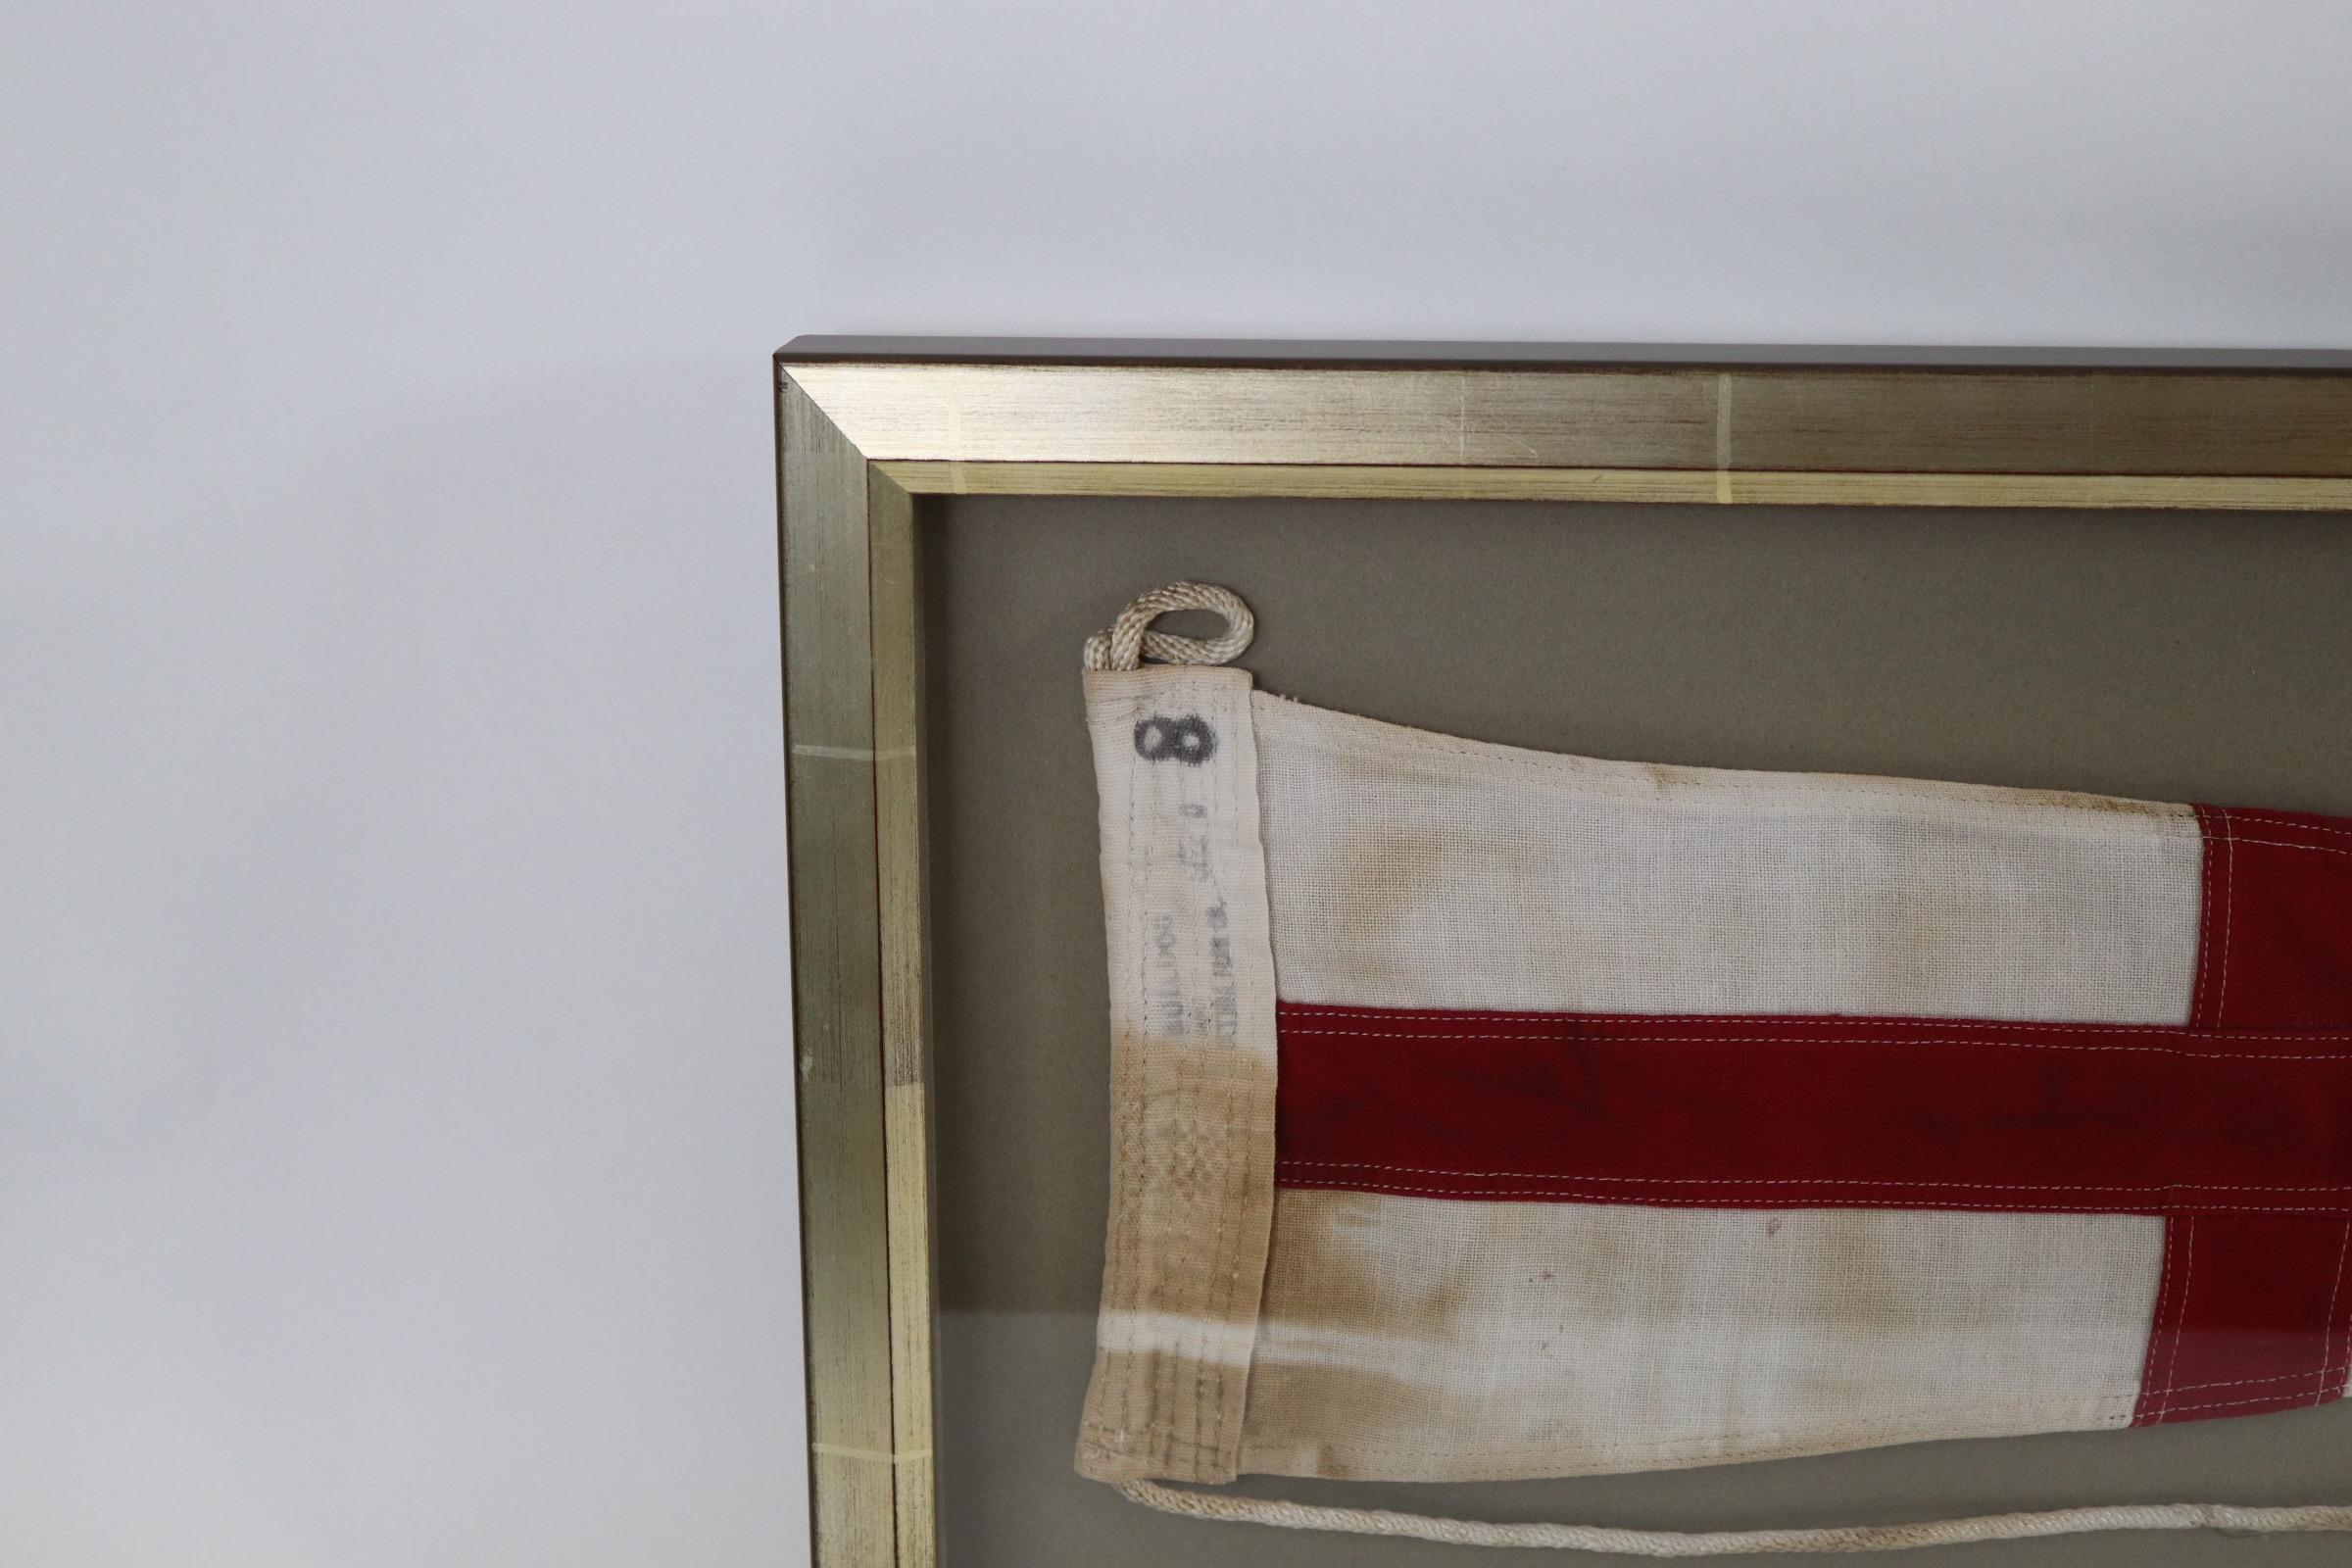 Shadow box framed ships signal flag with attached rope and wood toggle. White field with Red Cross. Weight is 5 pounds.